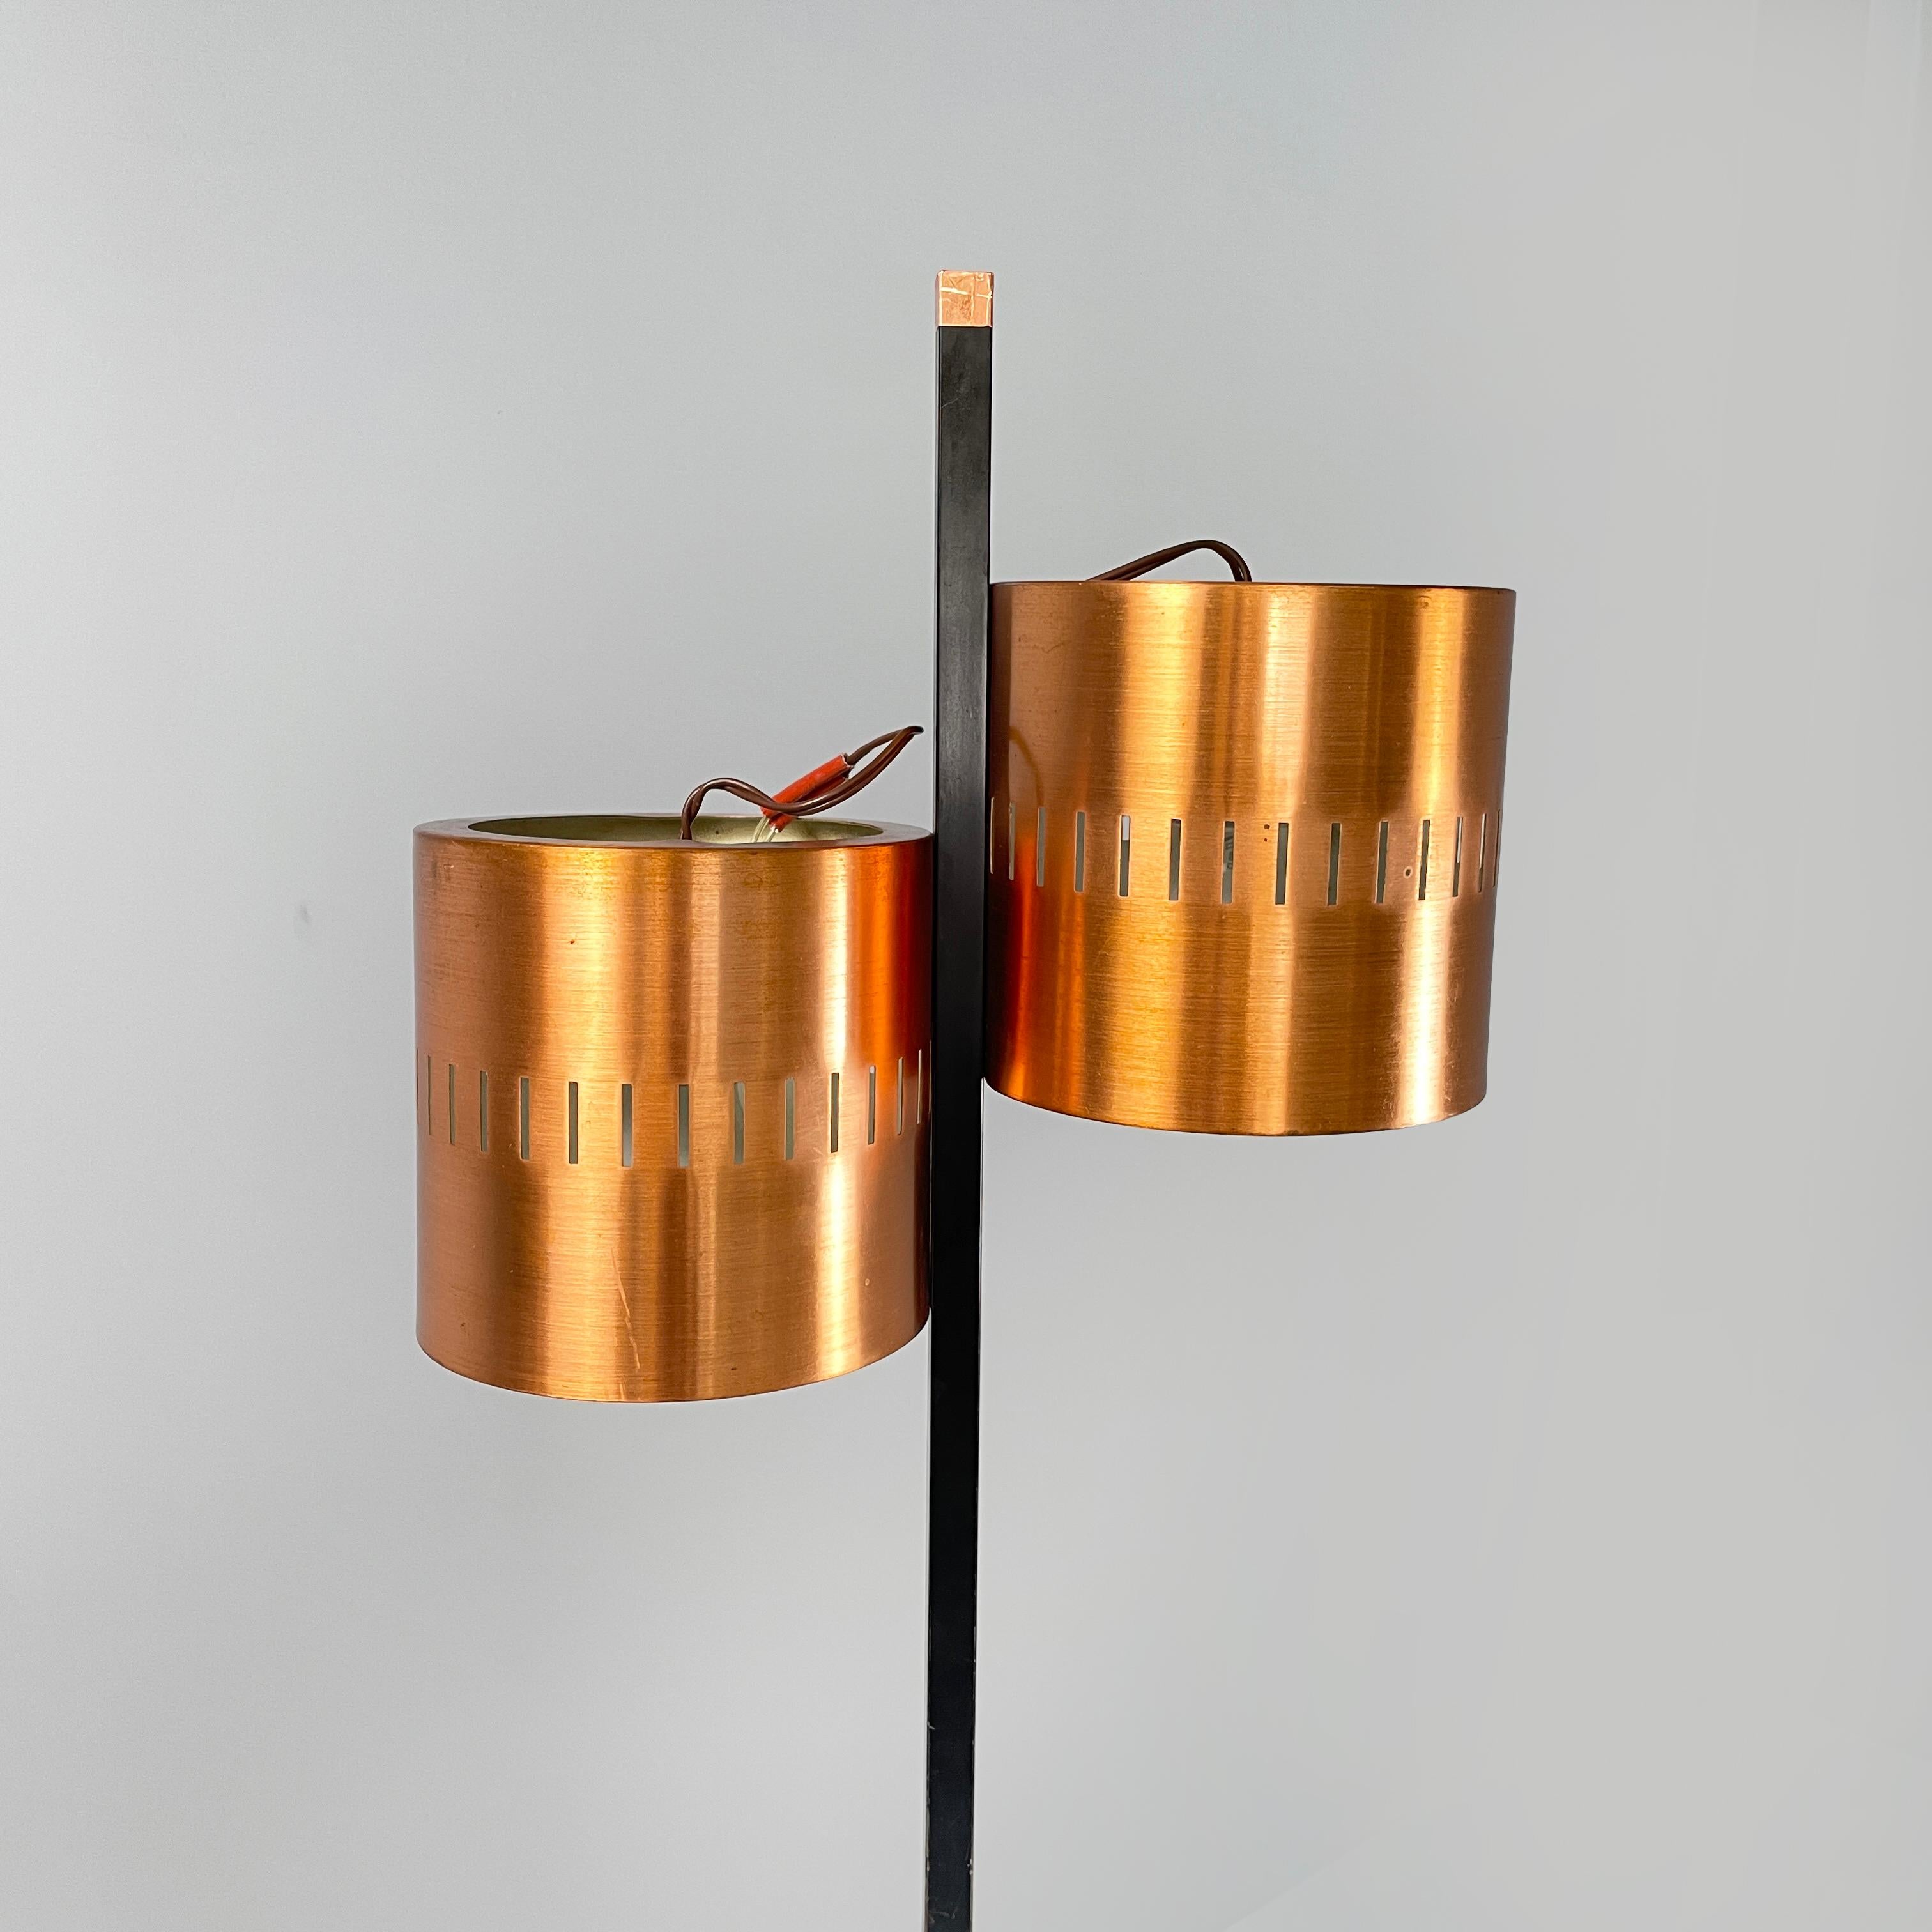 Italian mid-century modern Floor lamp in copper, black metal and marble, 1960s For Sale 2